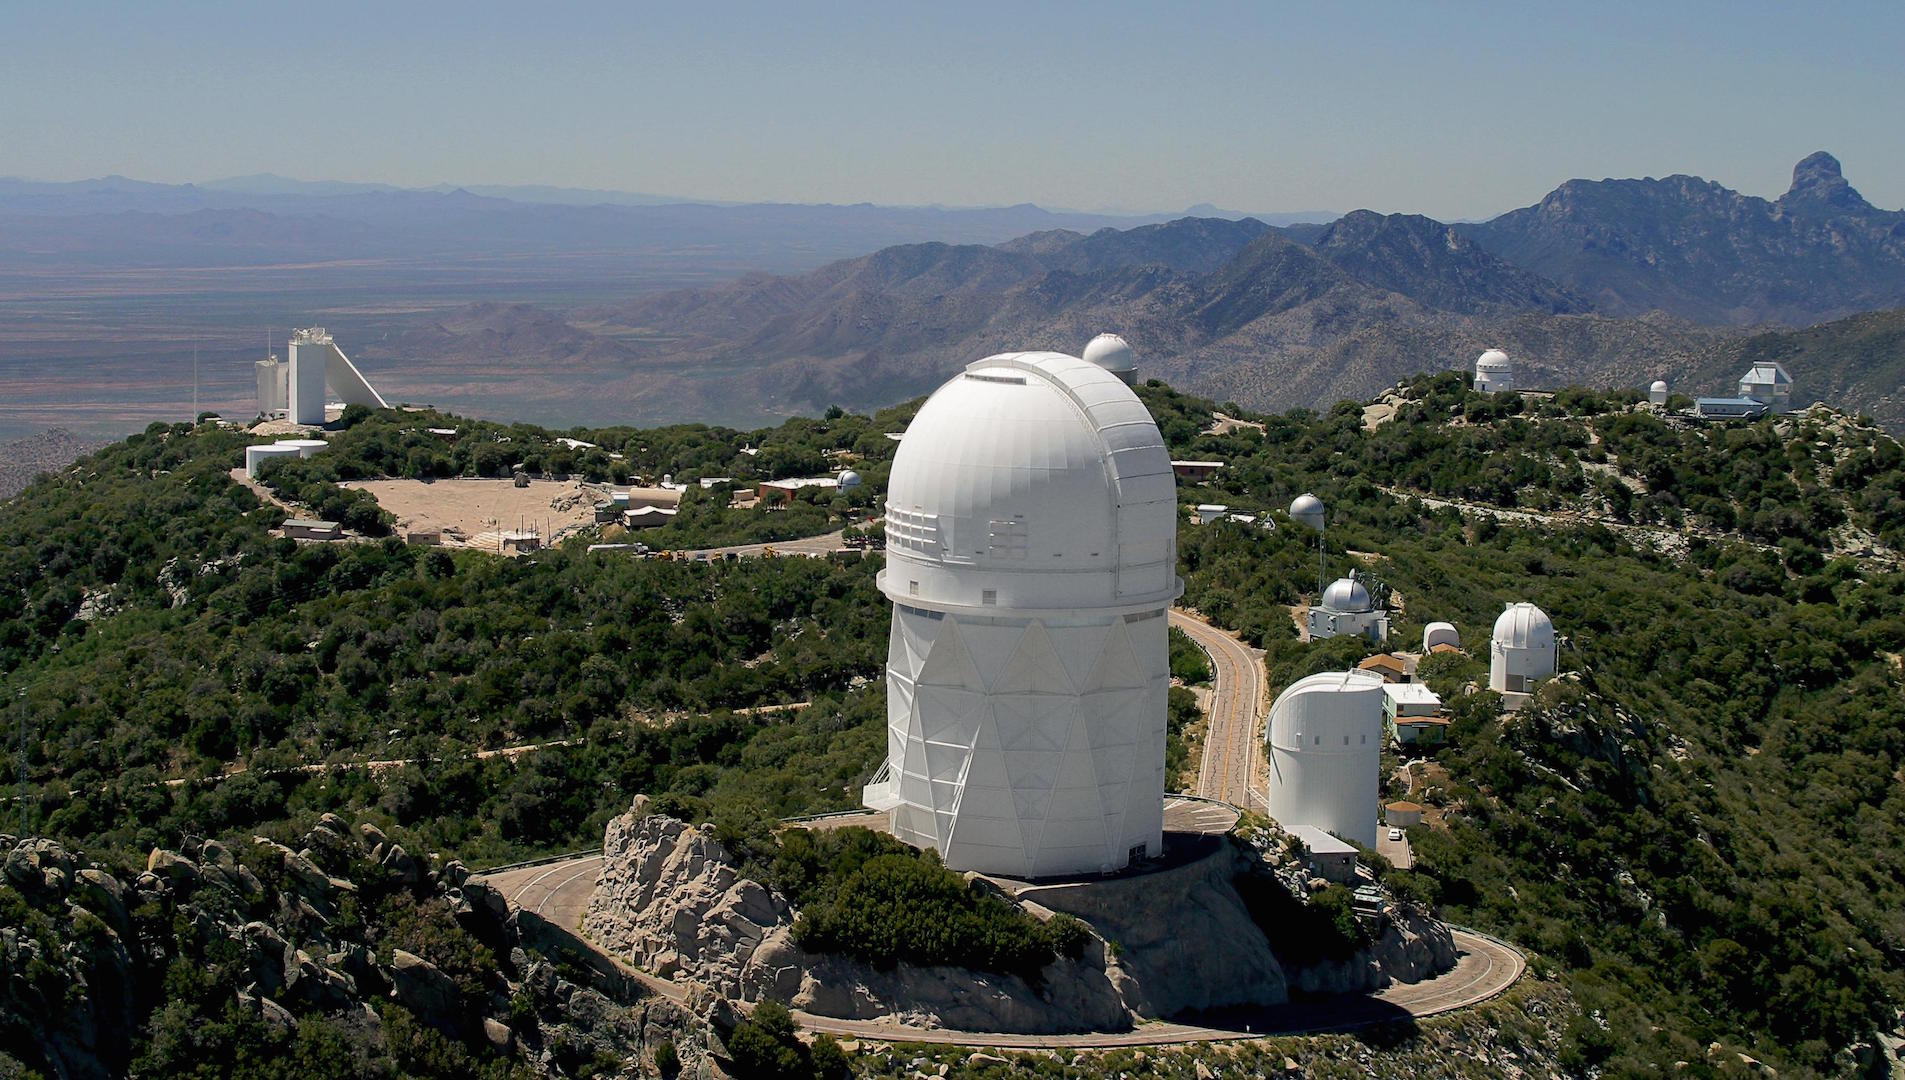 White domes and optical telescopes on the mountain peaks above the desert below.